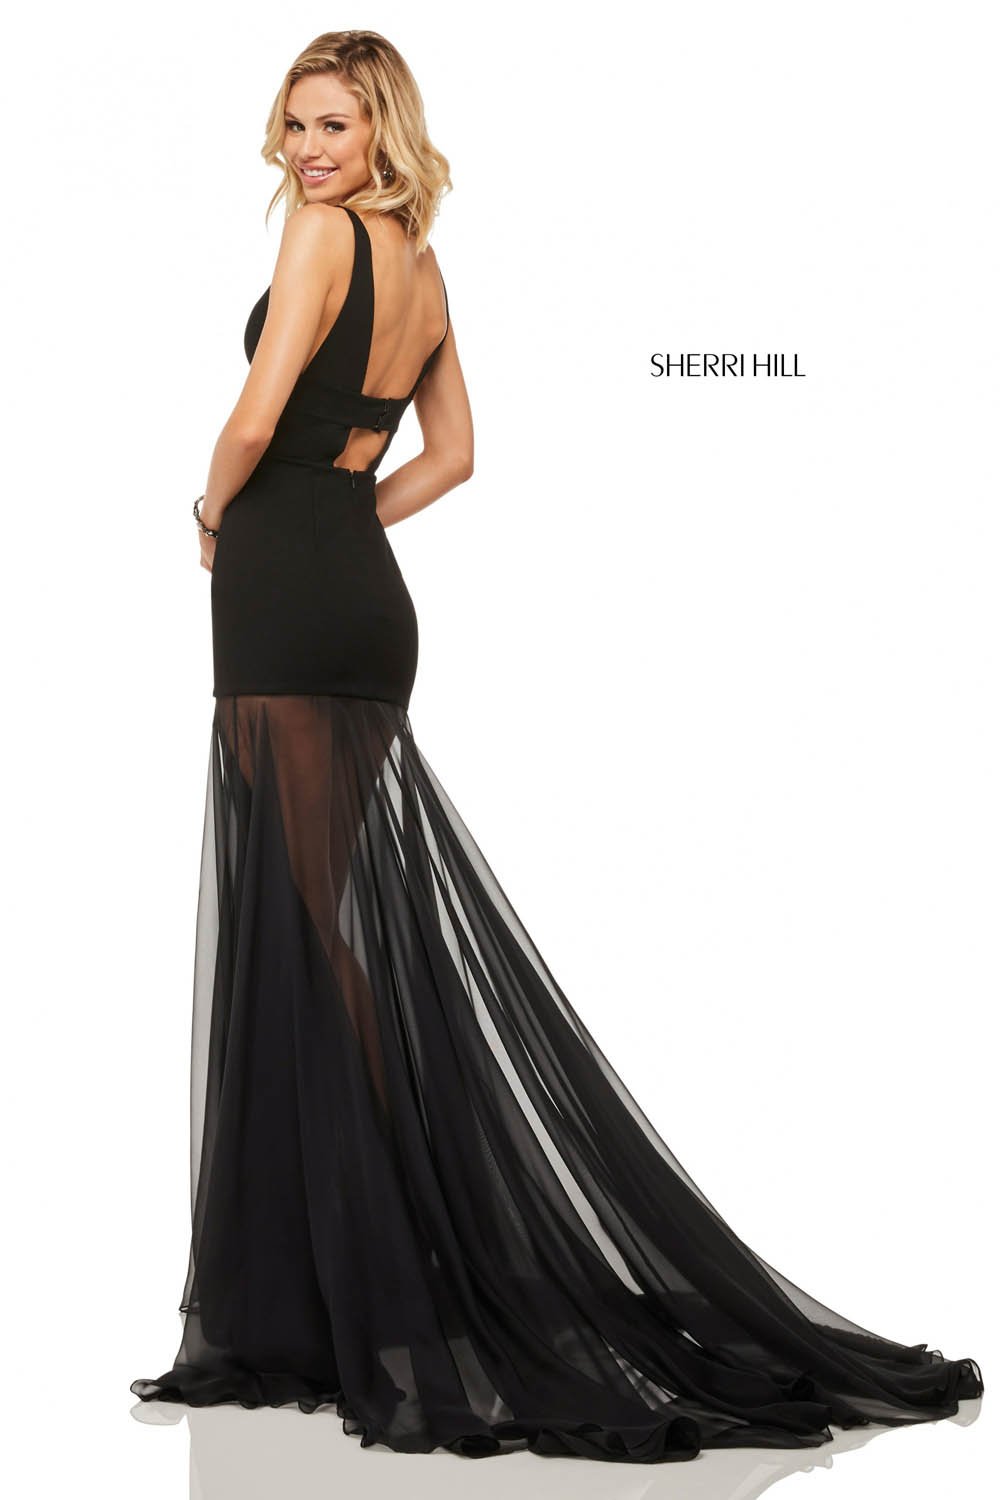 Sherri Hill 52606 dress images in these colors: Black, Red, Navy, Yellow.